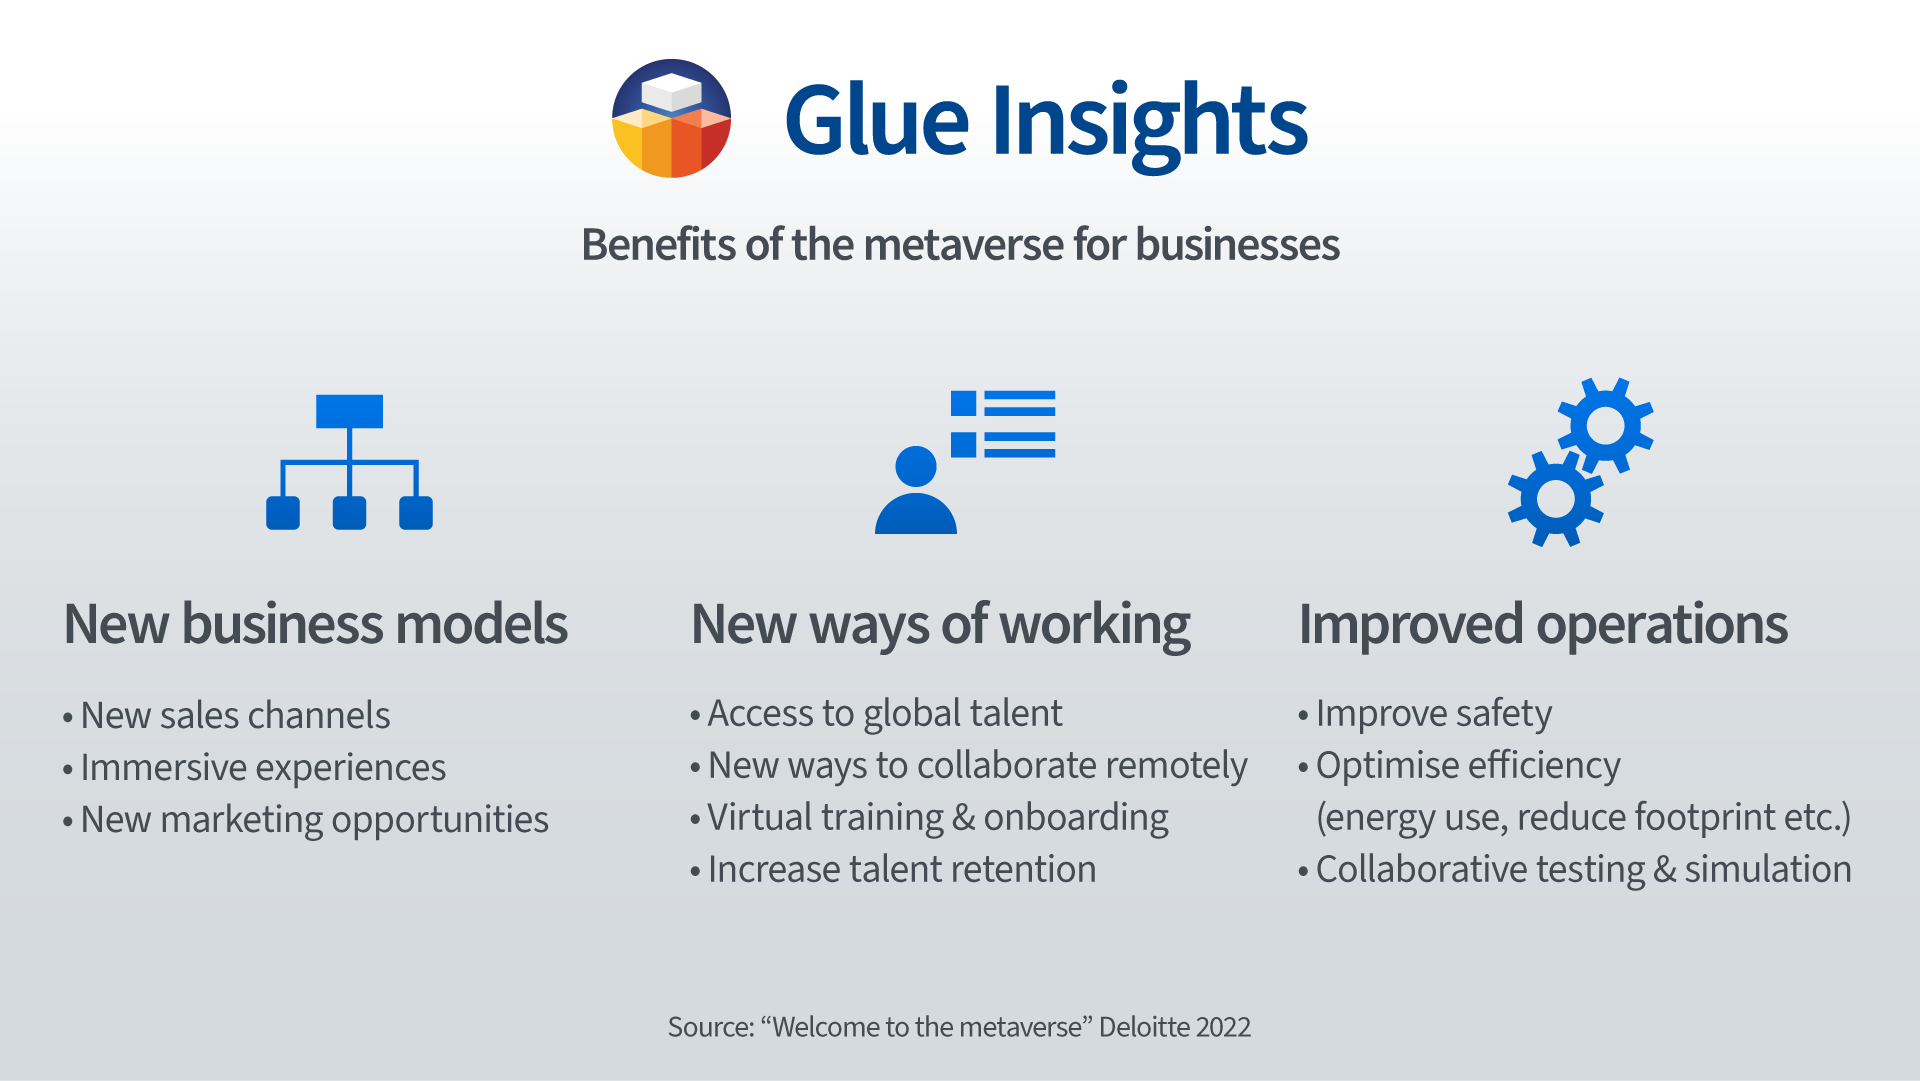 Glue insights benefits of the metaverse for business